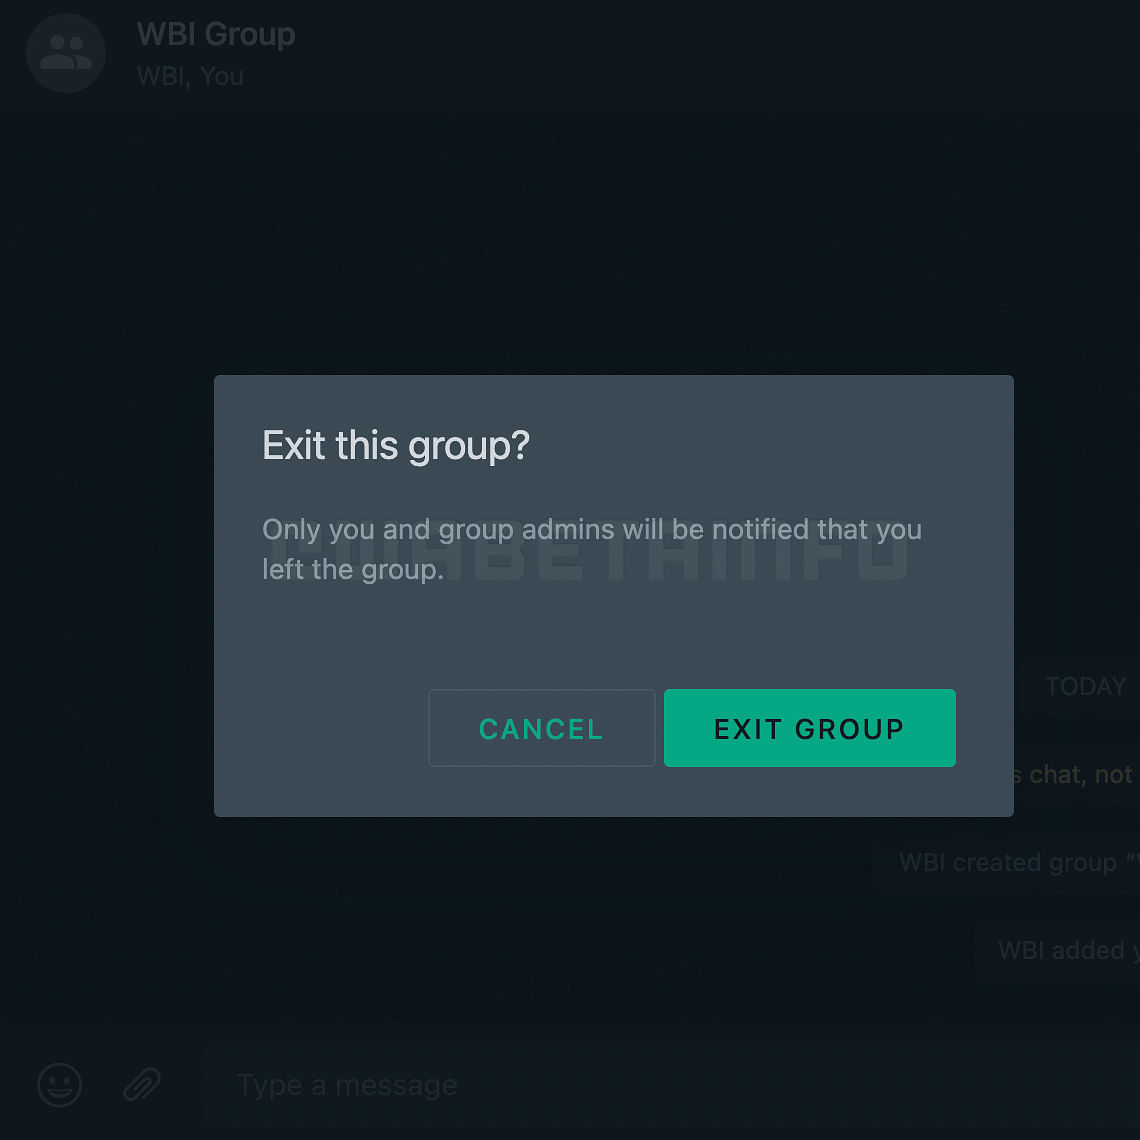 WhatsApp's new update of silent group exit is said to be under development.